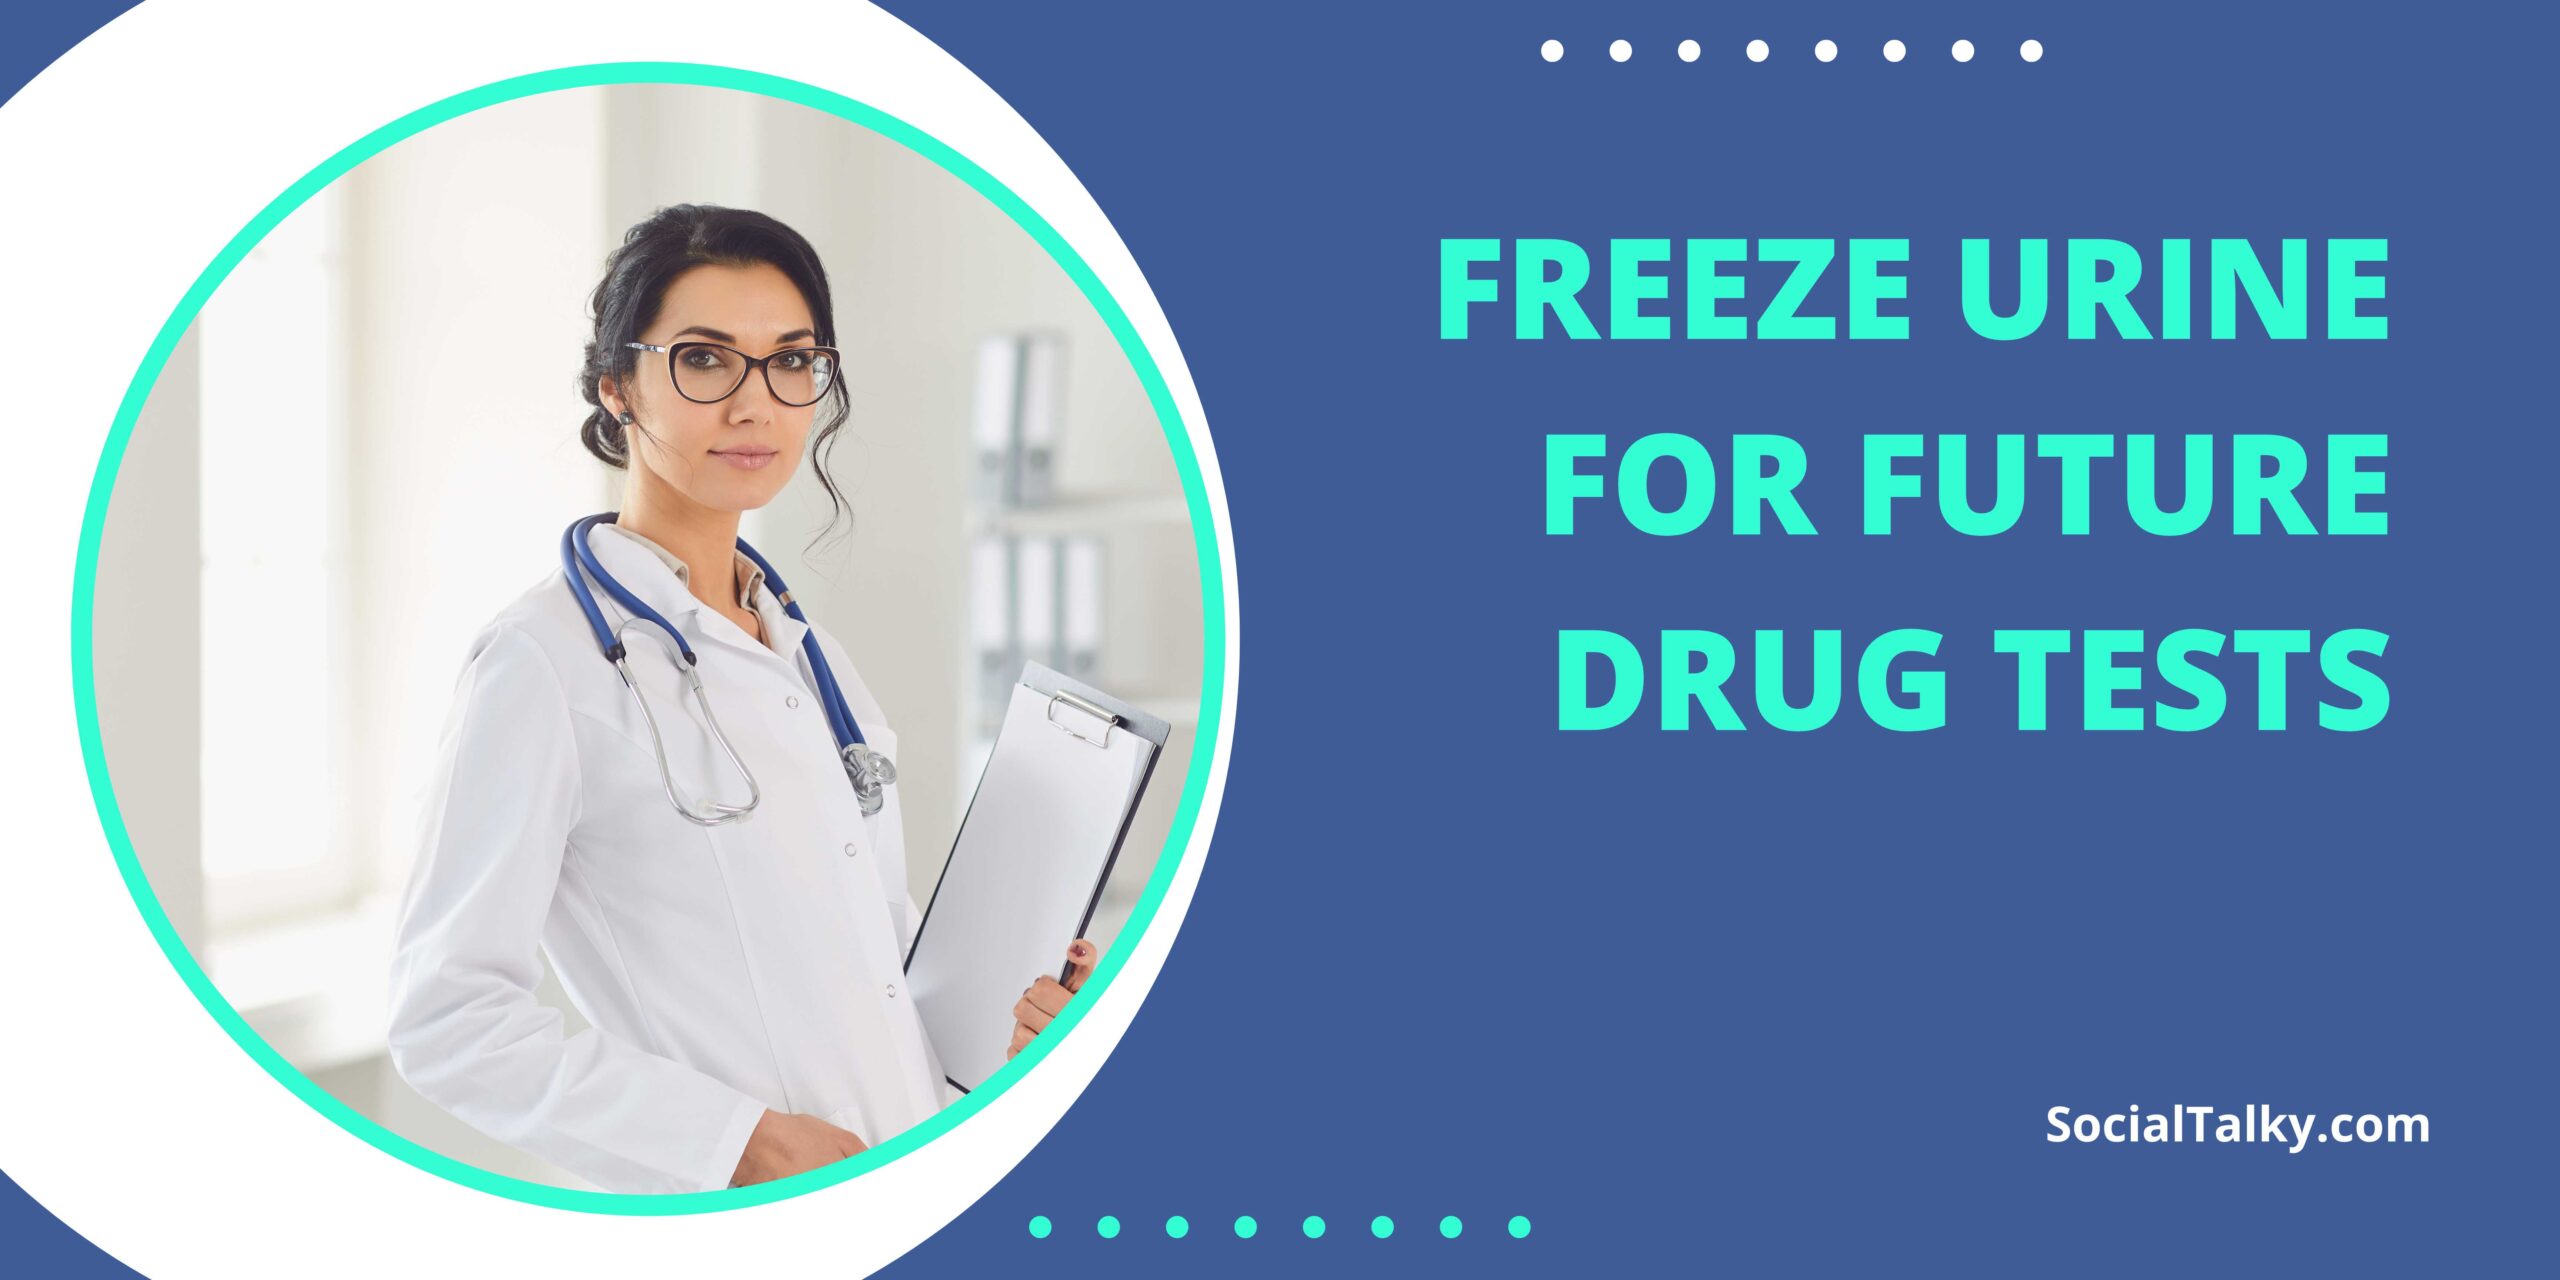 Can You Freeze Urine for Future Drug Tests?